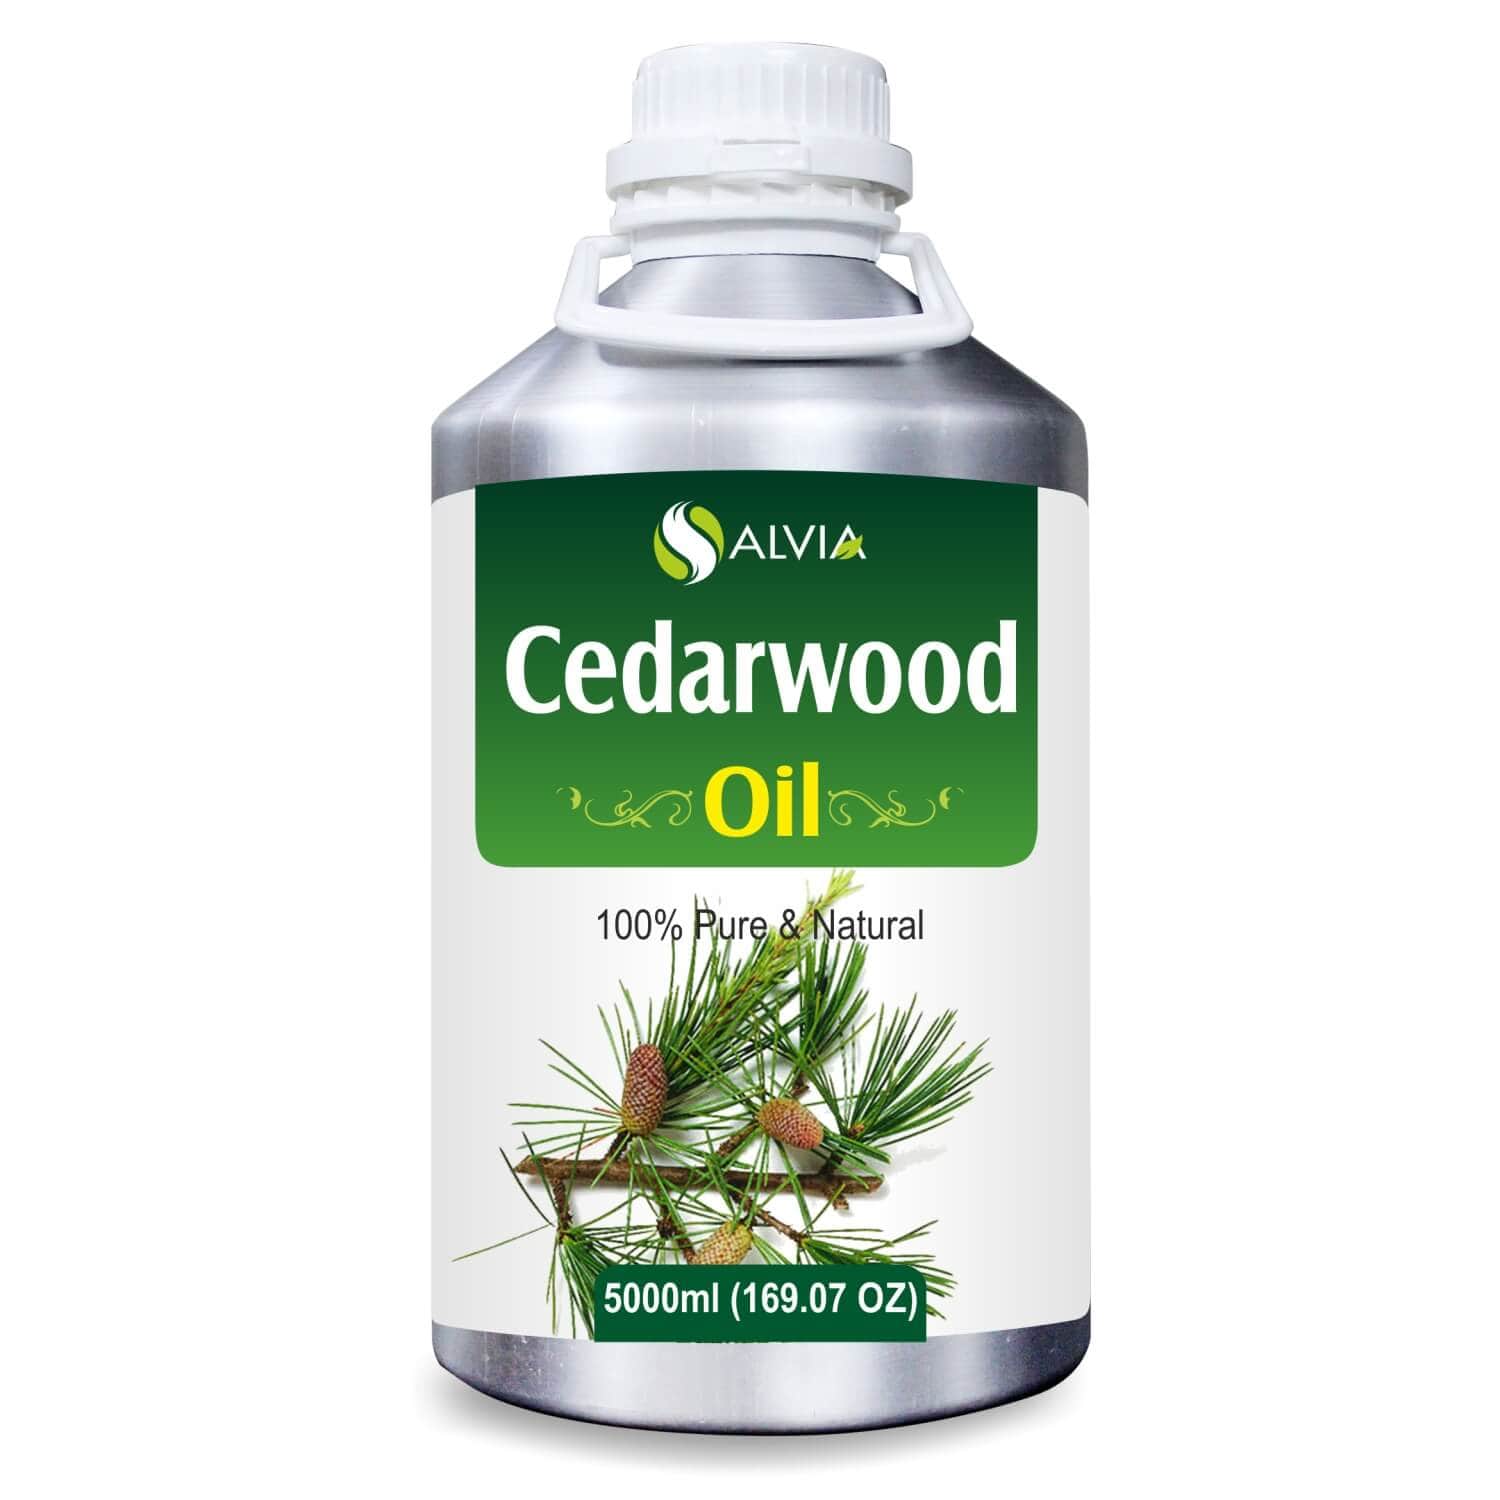 Salvia Natural Essential Oils,Dandruff,Greasy Oil,Acne,Anti-acne Oil,Oil for Greasy hair,Best Essential Oils for Hair 5000ml Cedarwood Oil (Juniperus virginiana) 100% Natural Essential Oil Undiluted Therapeutic Grade Eases Stress, Kills Pests, Hair Growth, Skin Benefits, & More